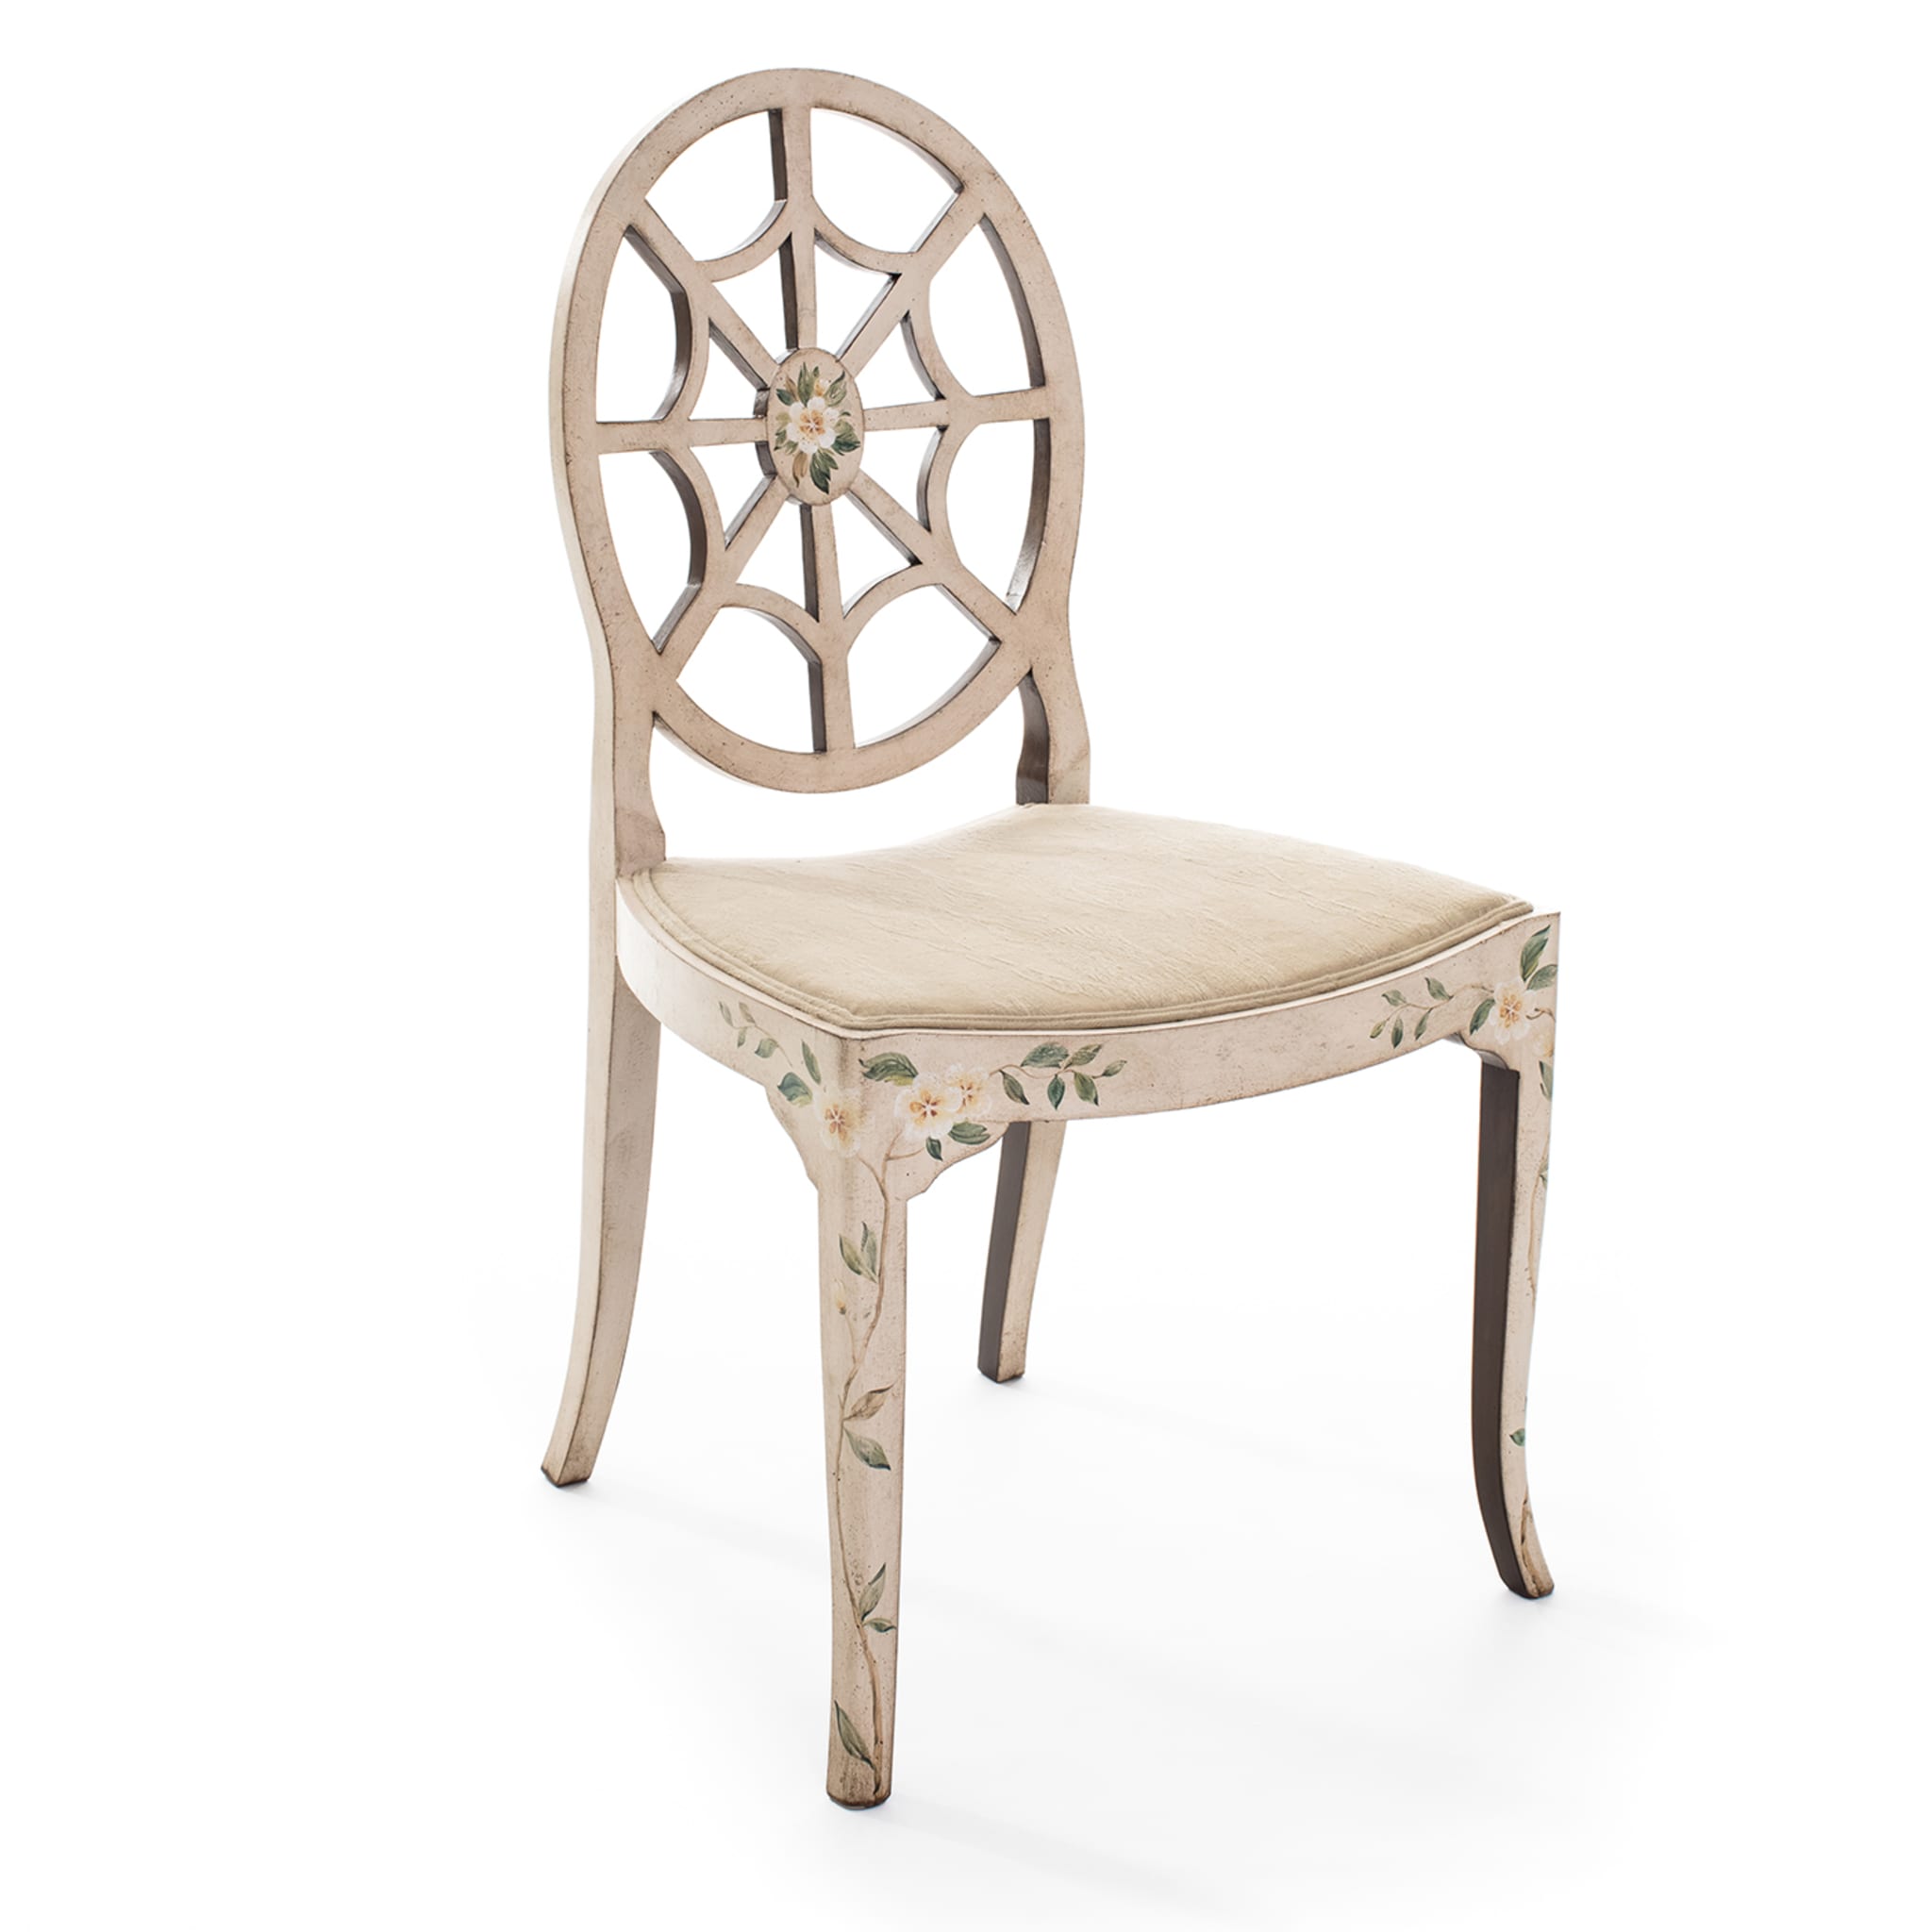 Aqulieia Brenches & Flowers Cream Dining Chair  - Alternative view 1